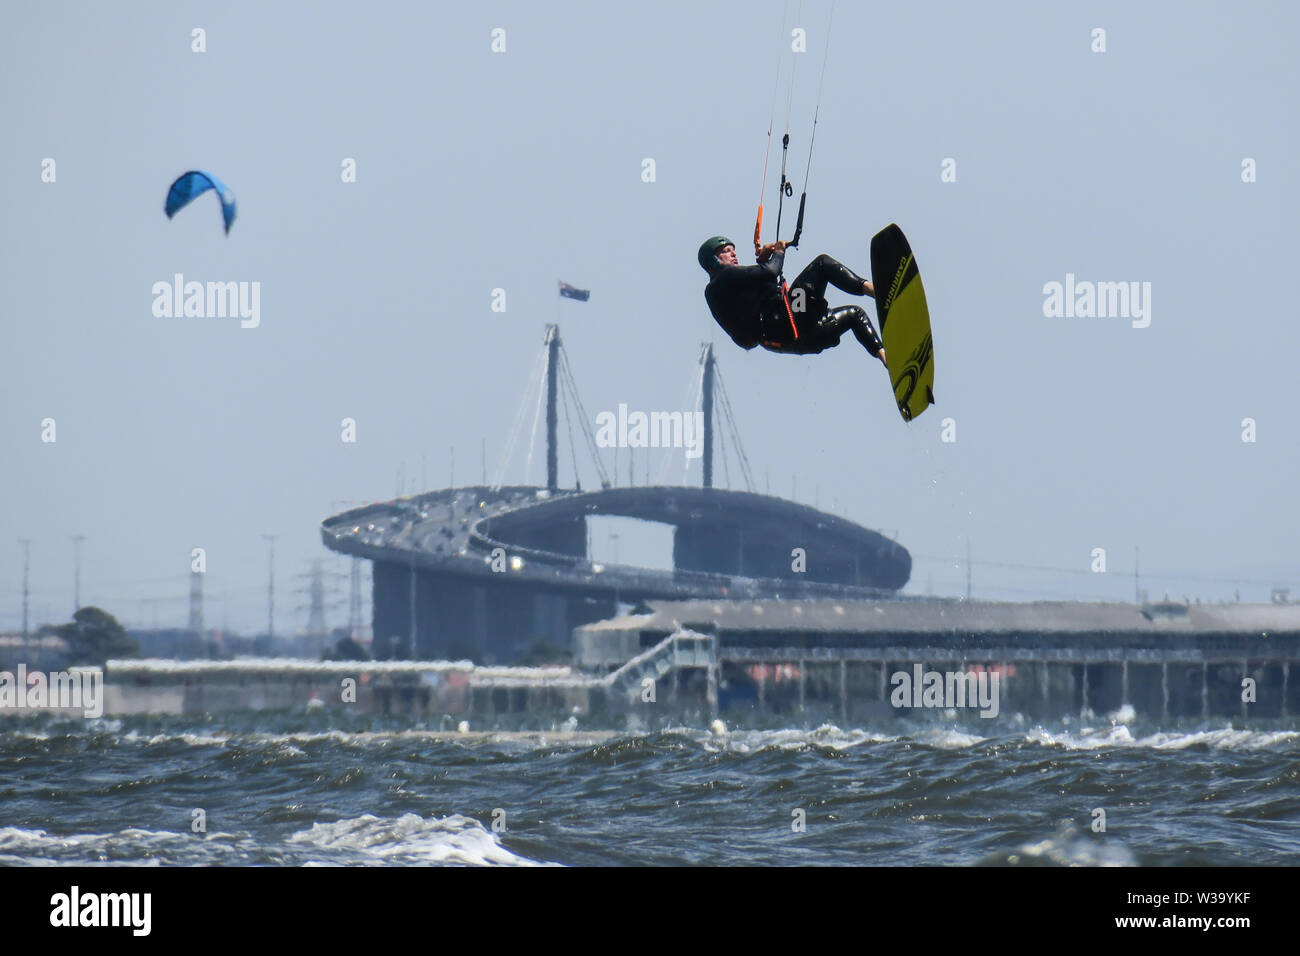 Kitesurfing on a windy day at Port Phillip Bay Melbourne Australia with West Gate Bridge in the background. Stock Photo